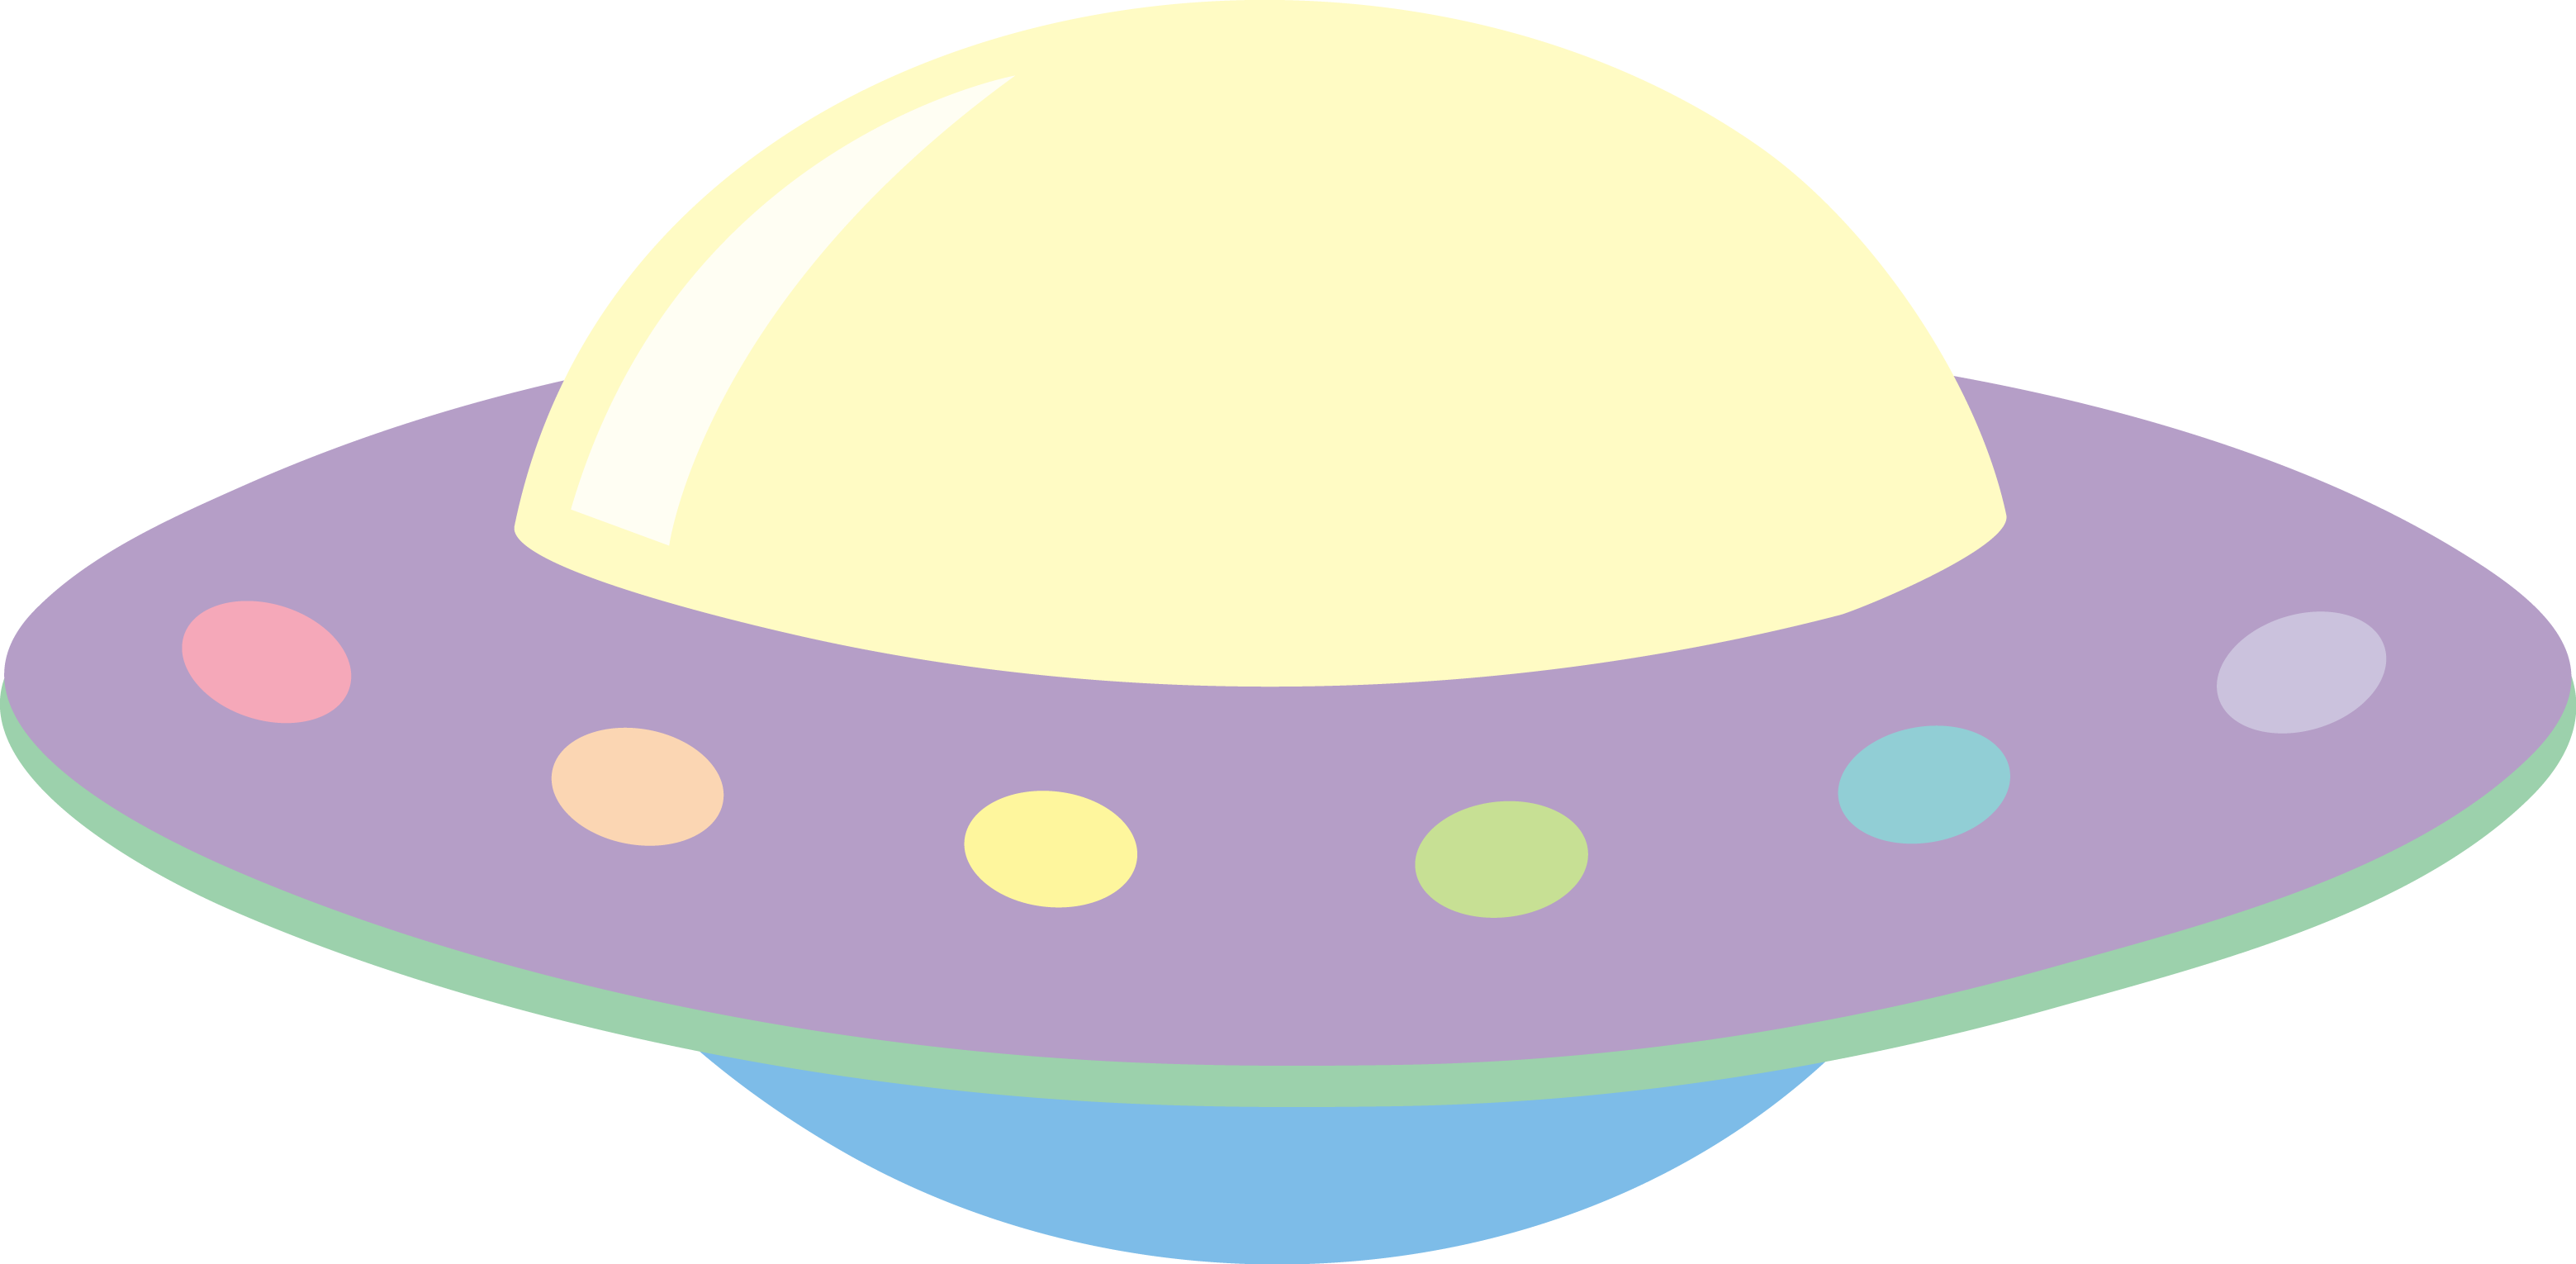 Alien Spaceship Clipart Images  Pictures - Becuo